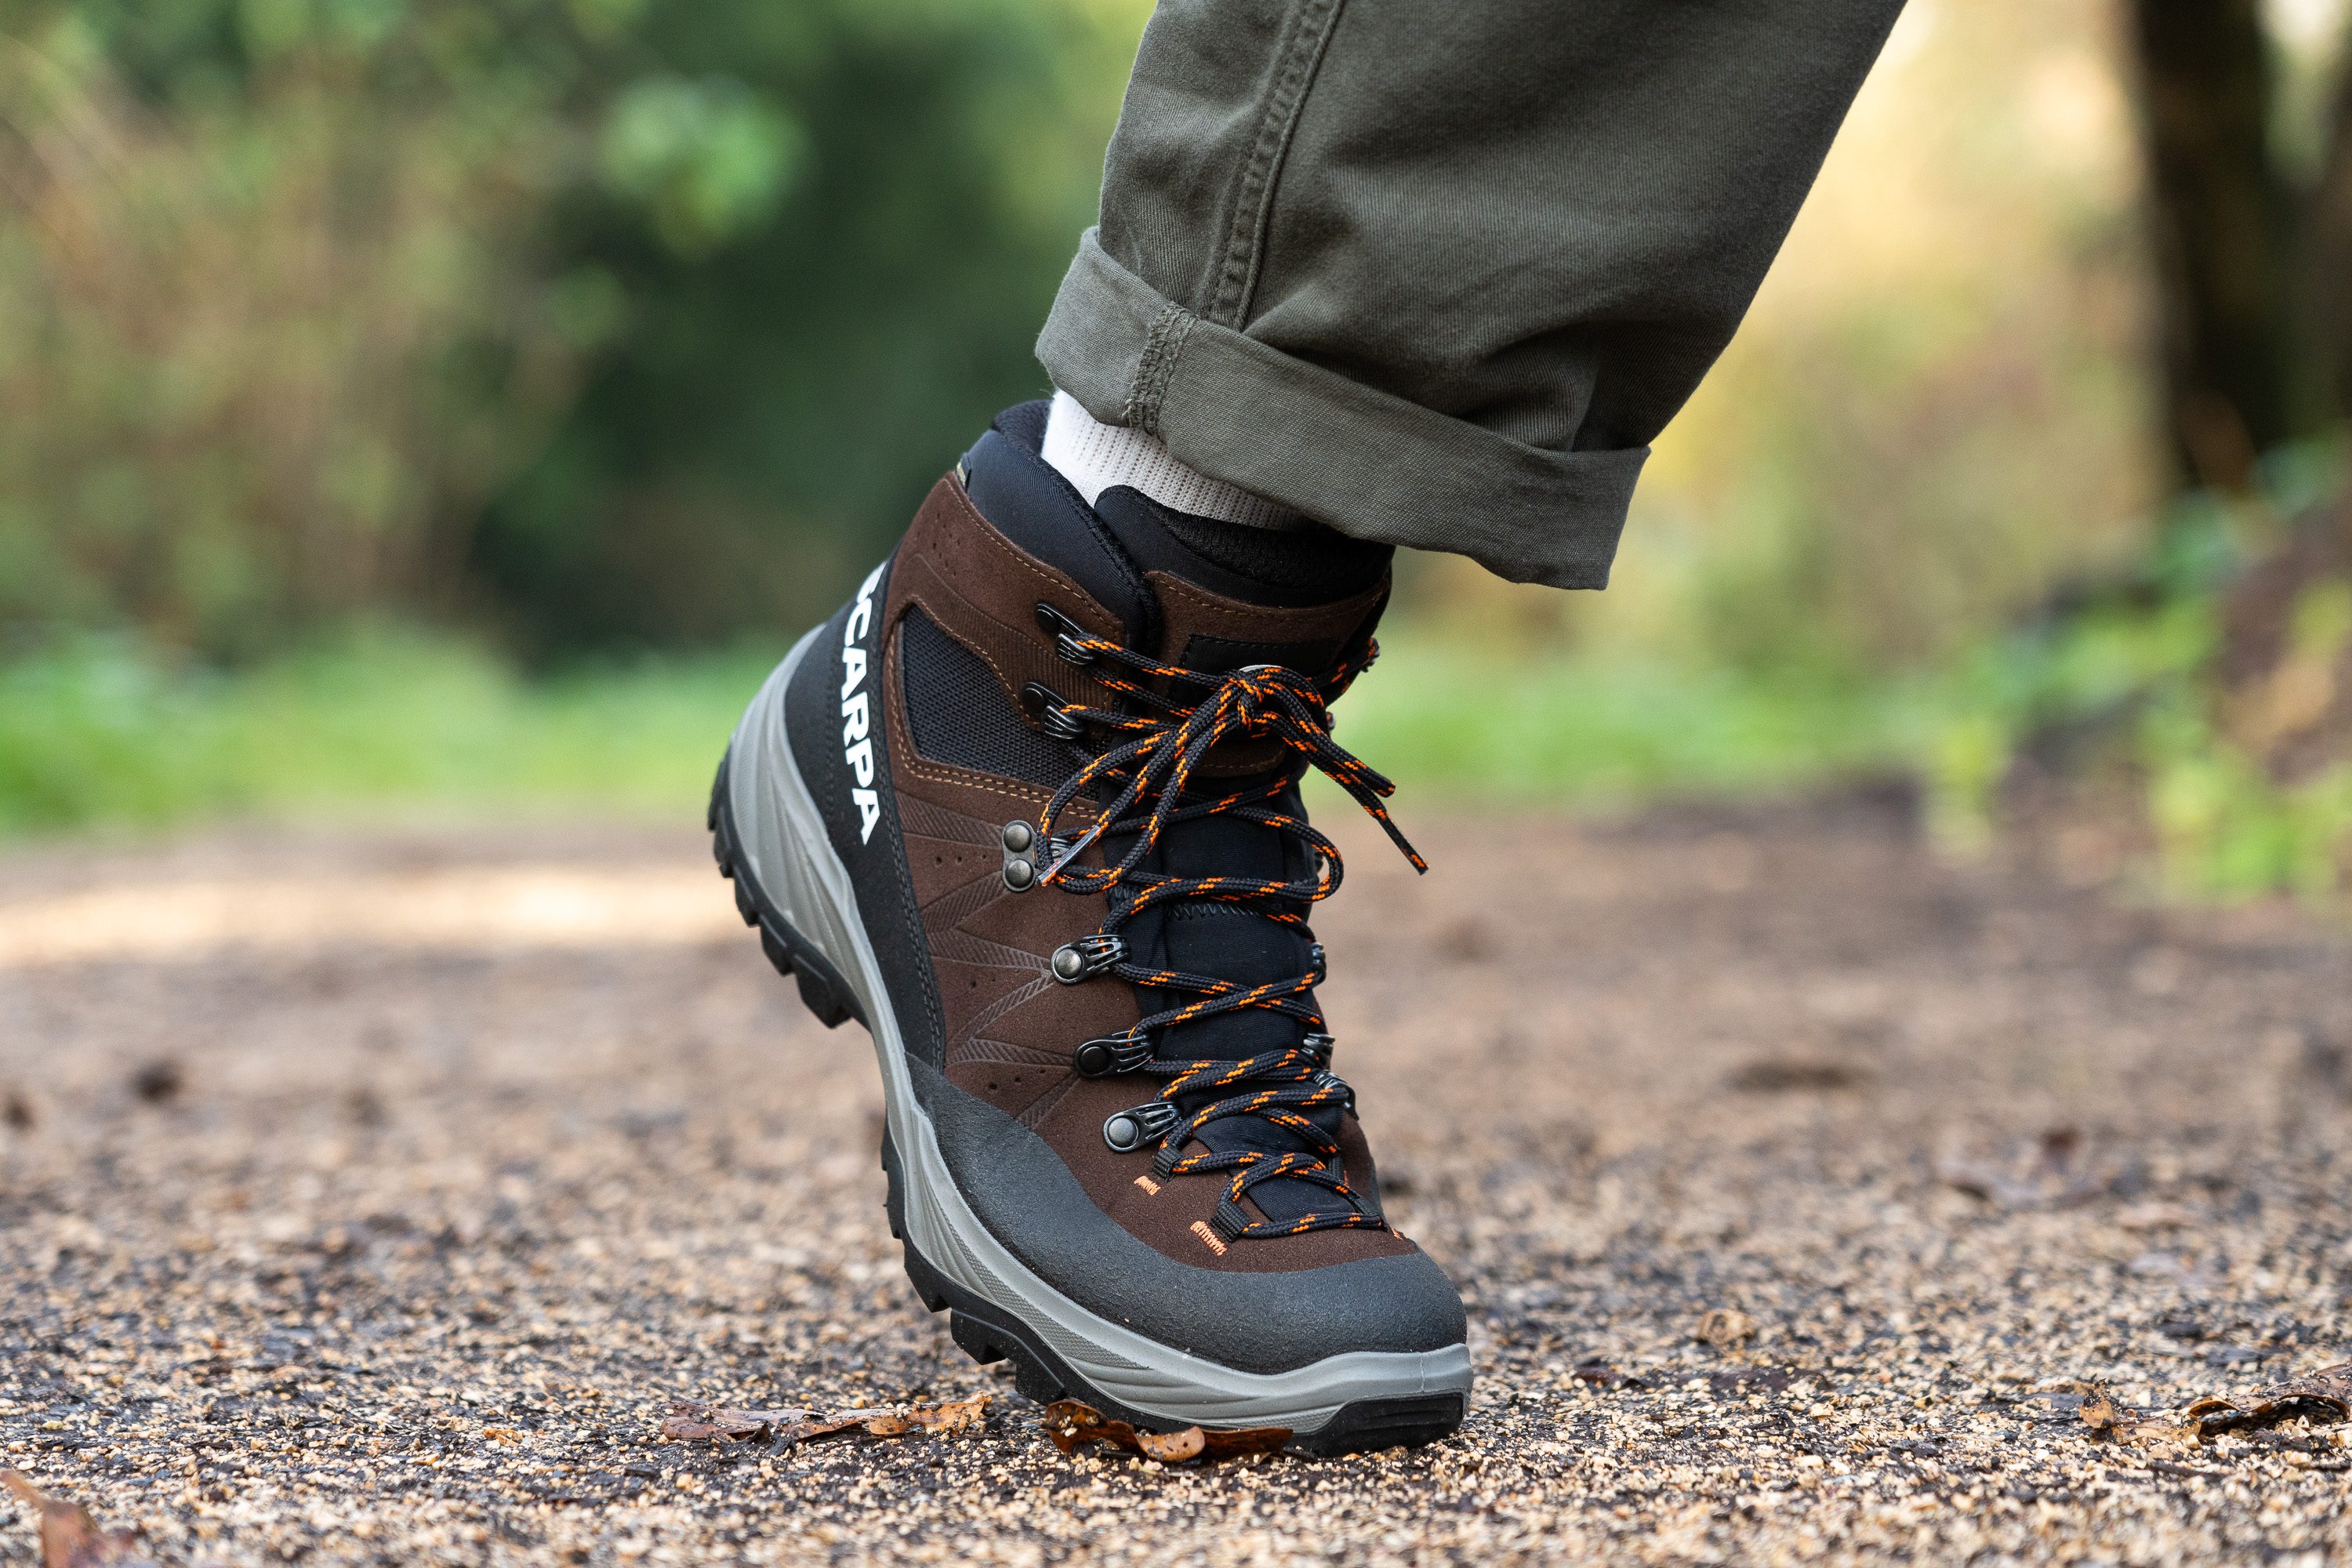 For a boot with a more natural, foot-shaped silhouette, we recommend checking out the Stiffness